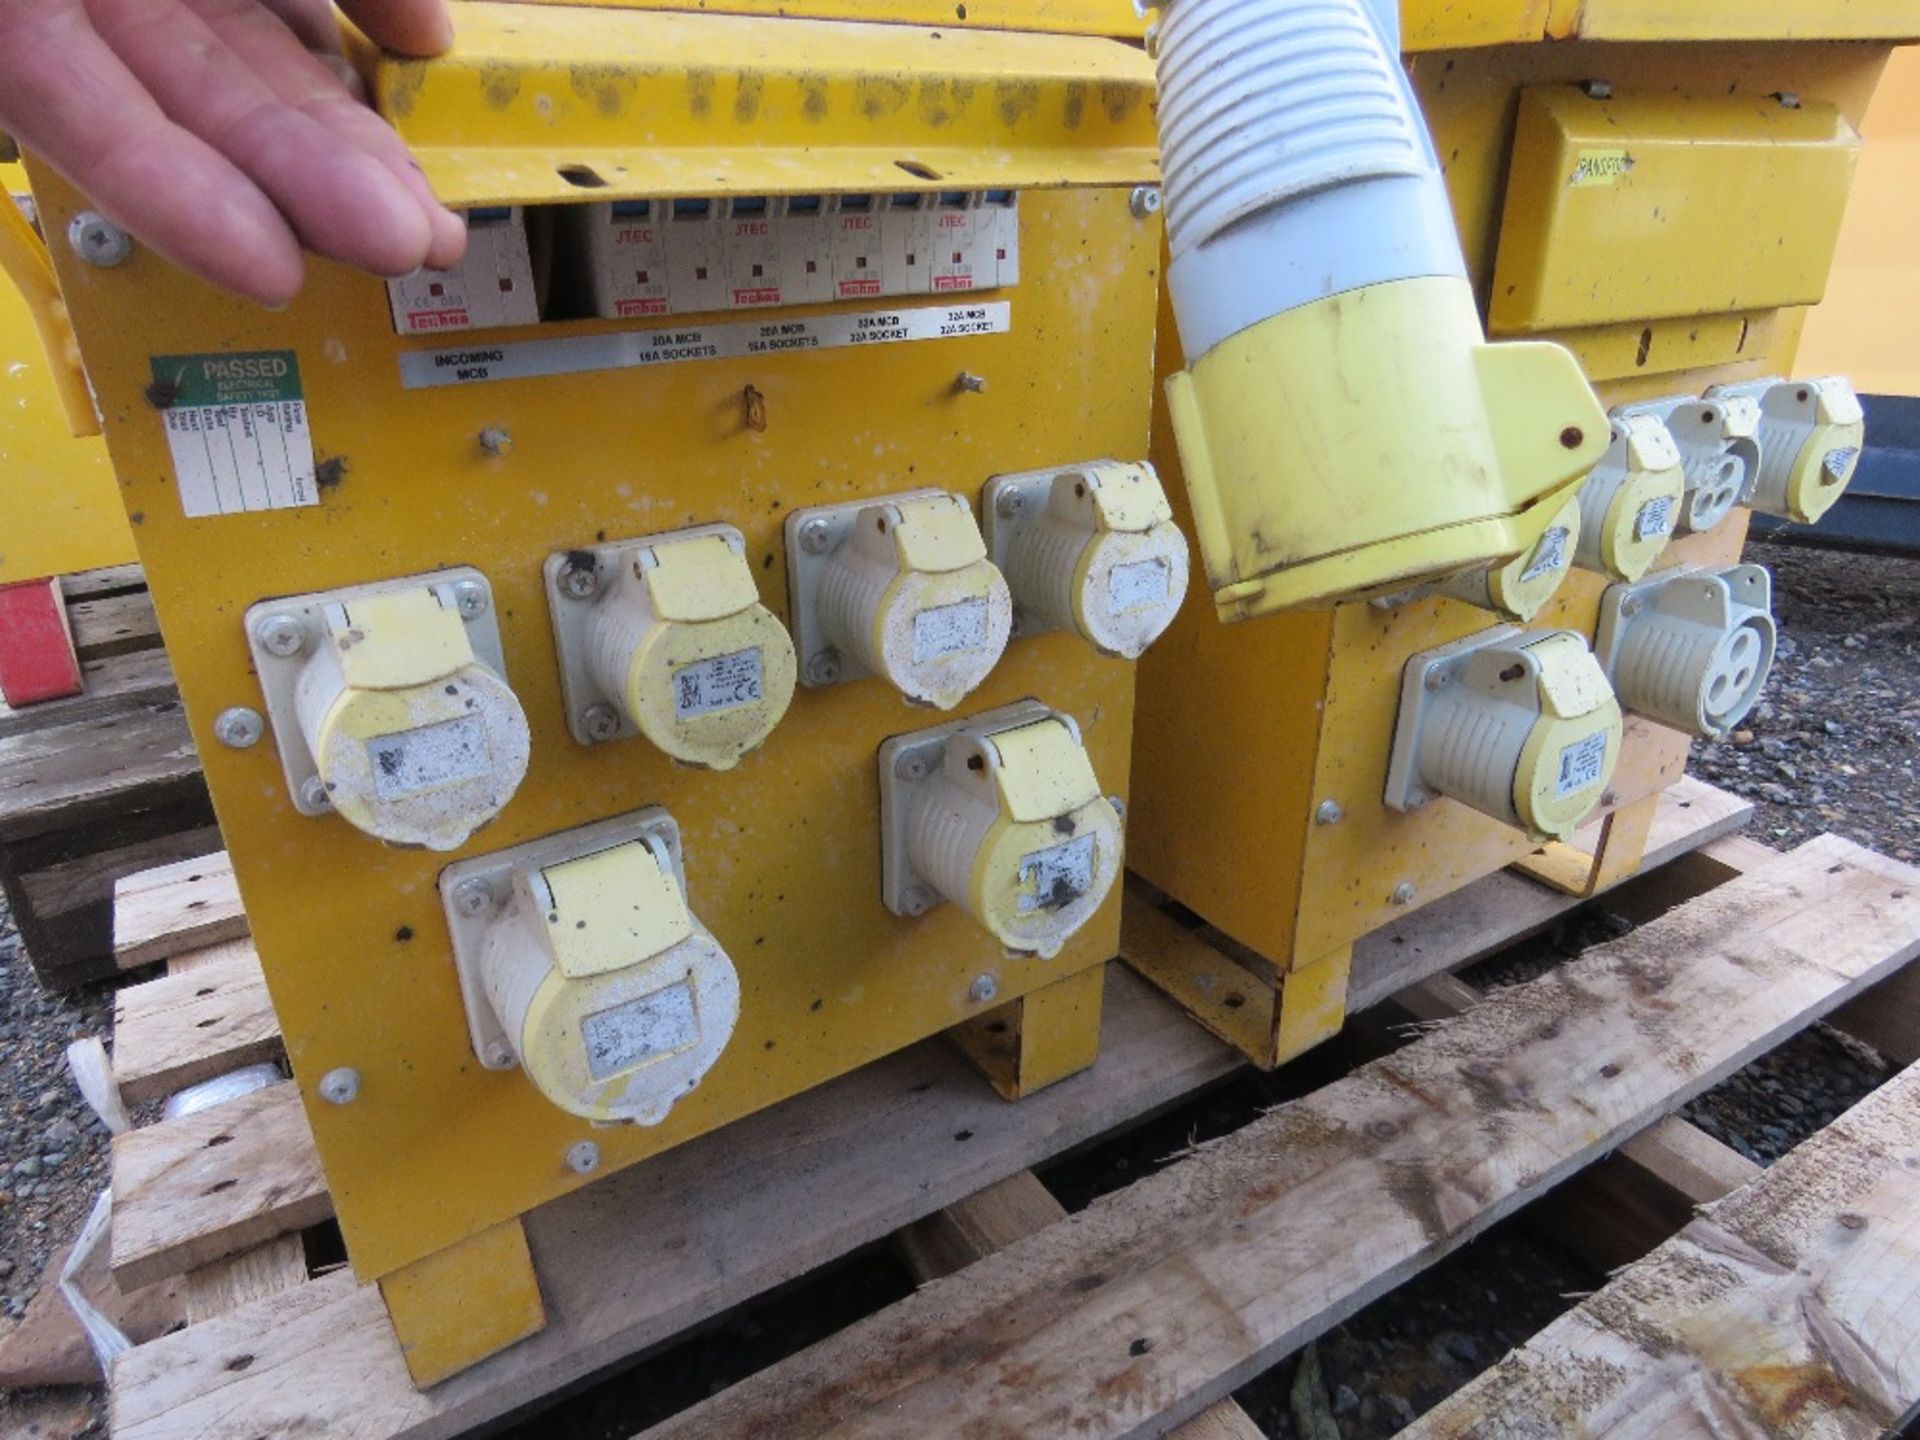 2 X LARGE SIZED SITE TRANSFORMERS, YELLOW PLUS AN EXTENSION LEAD. - Image 2 of 5